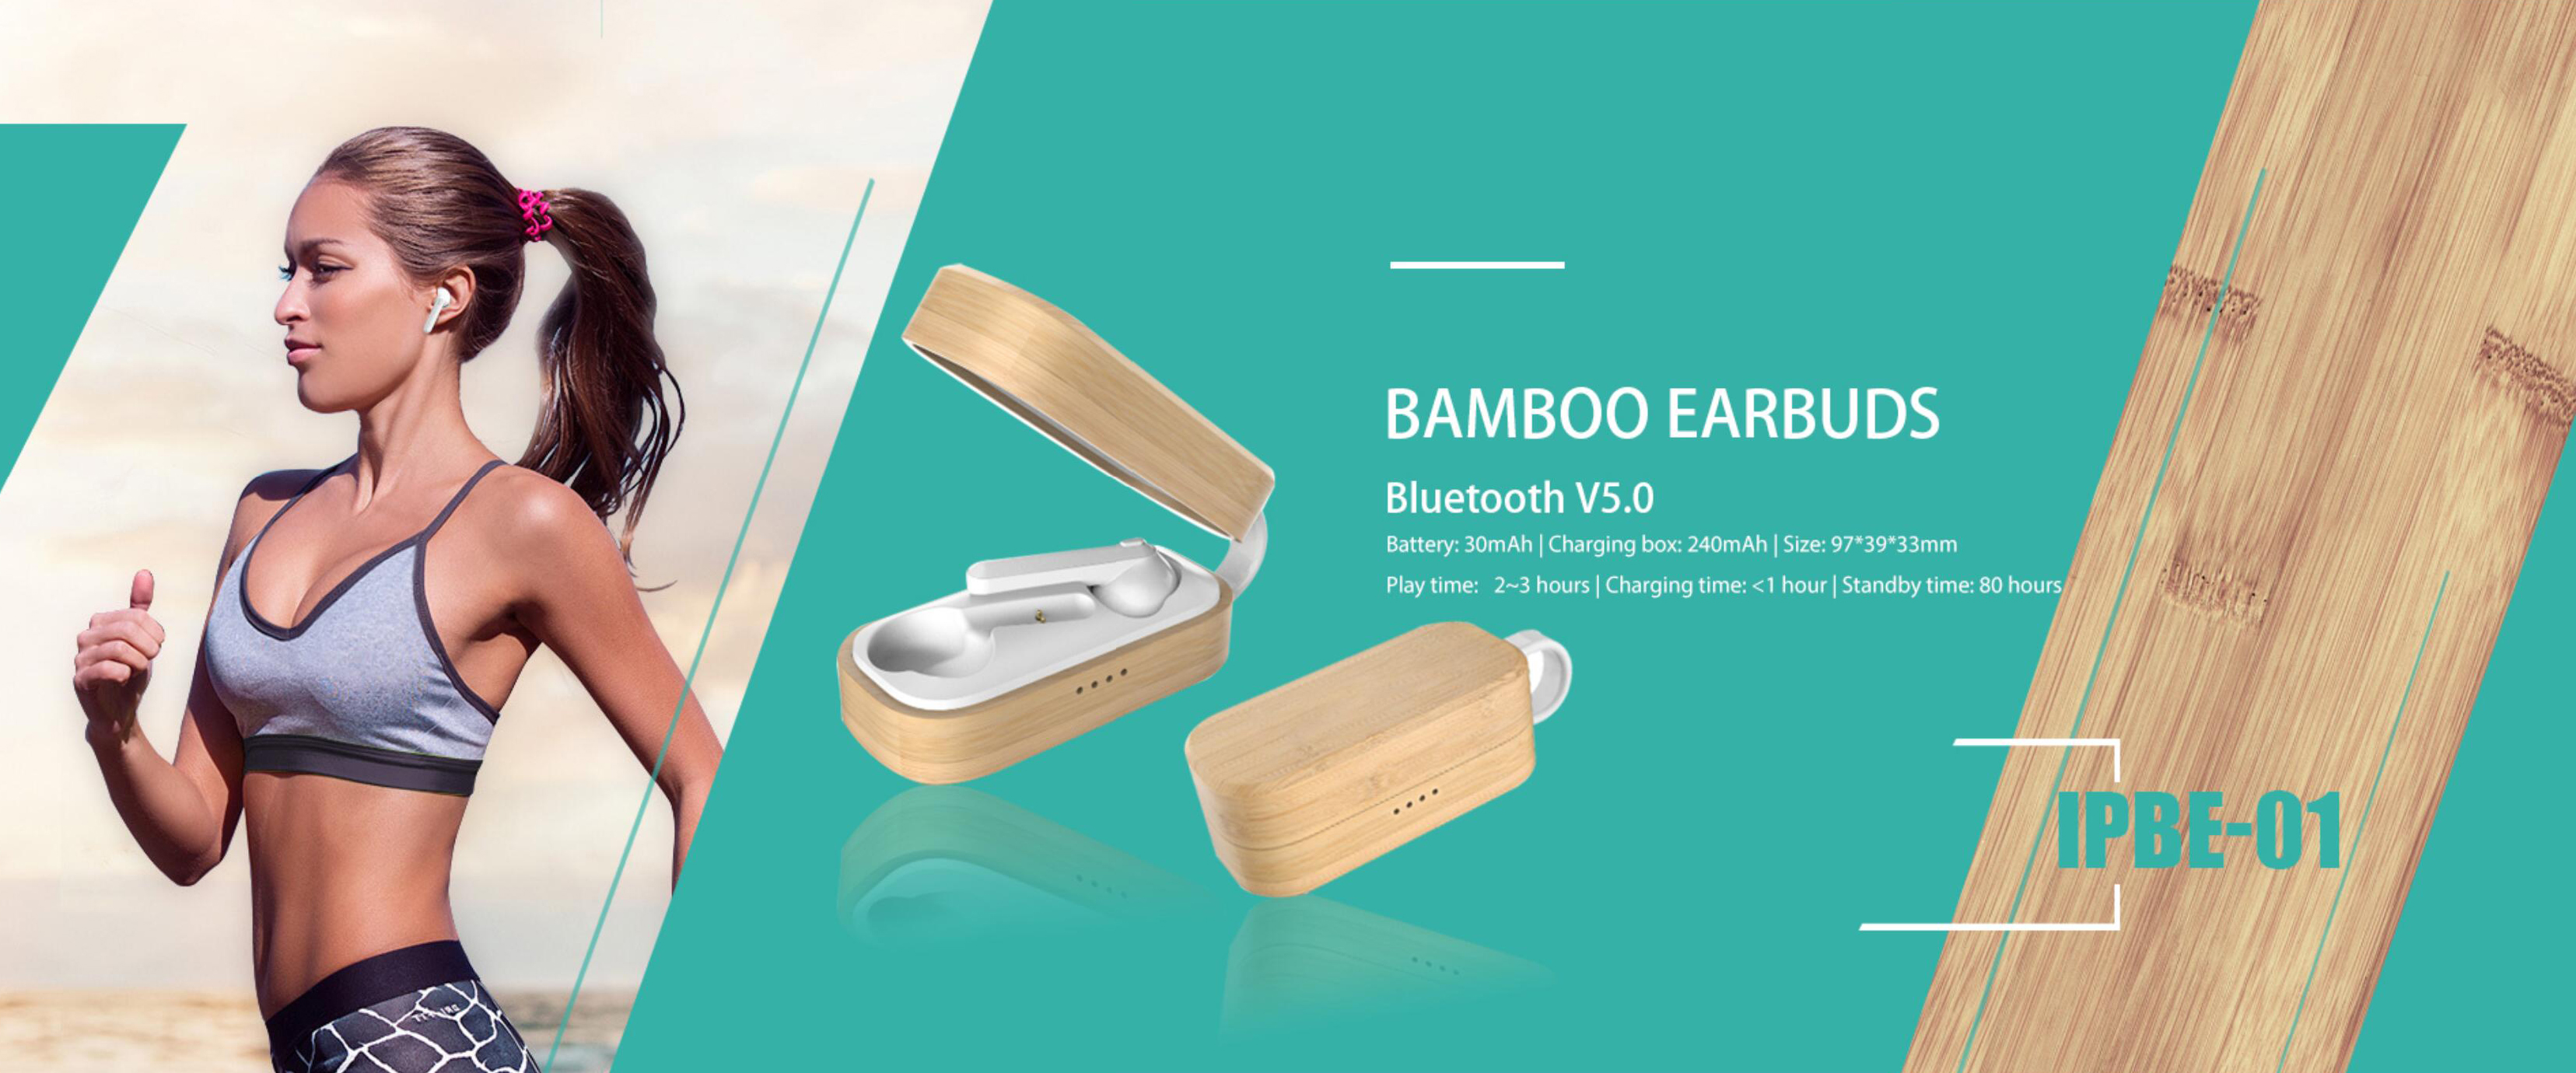 Bamboo earbuds